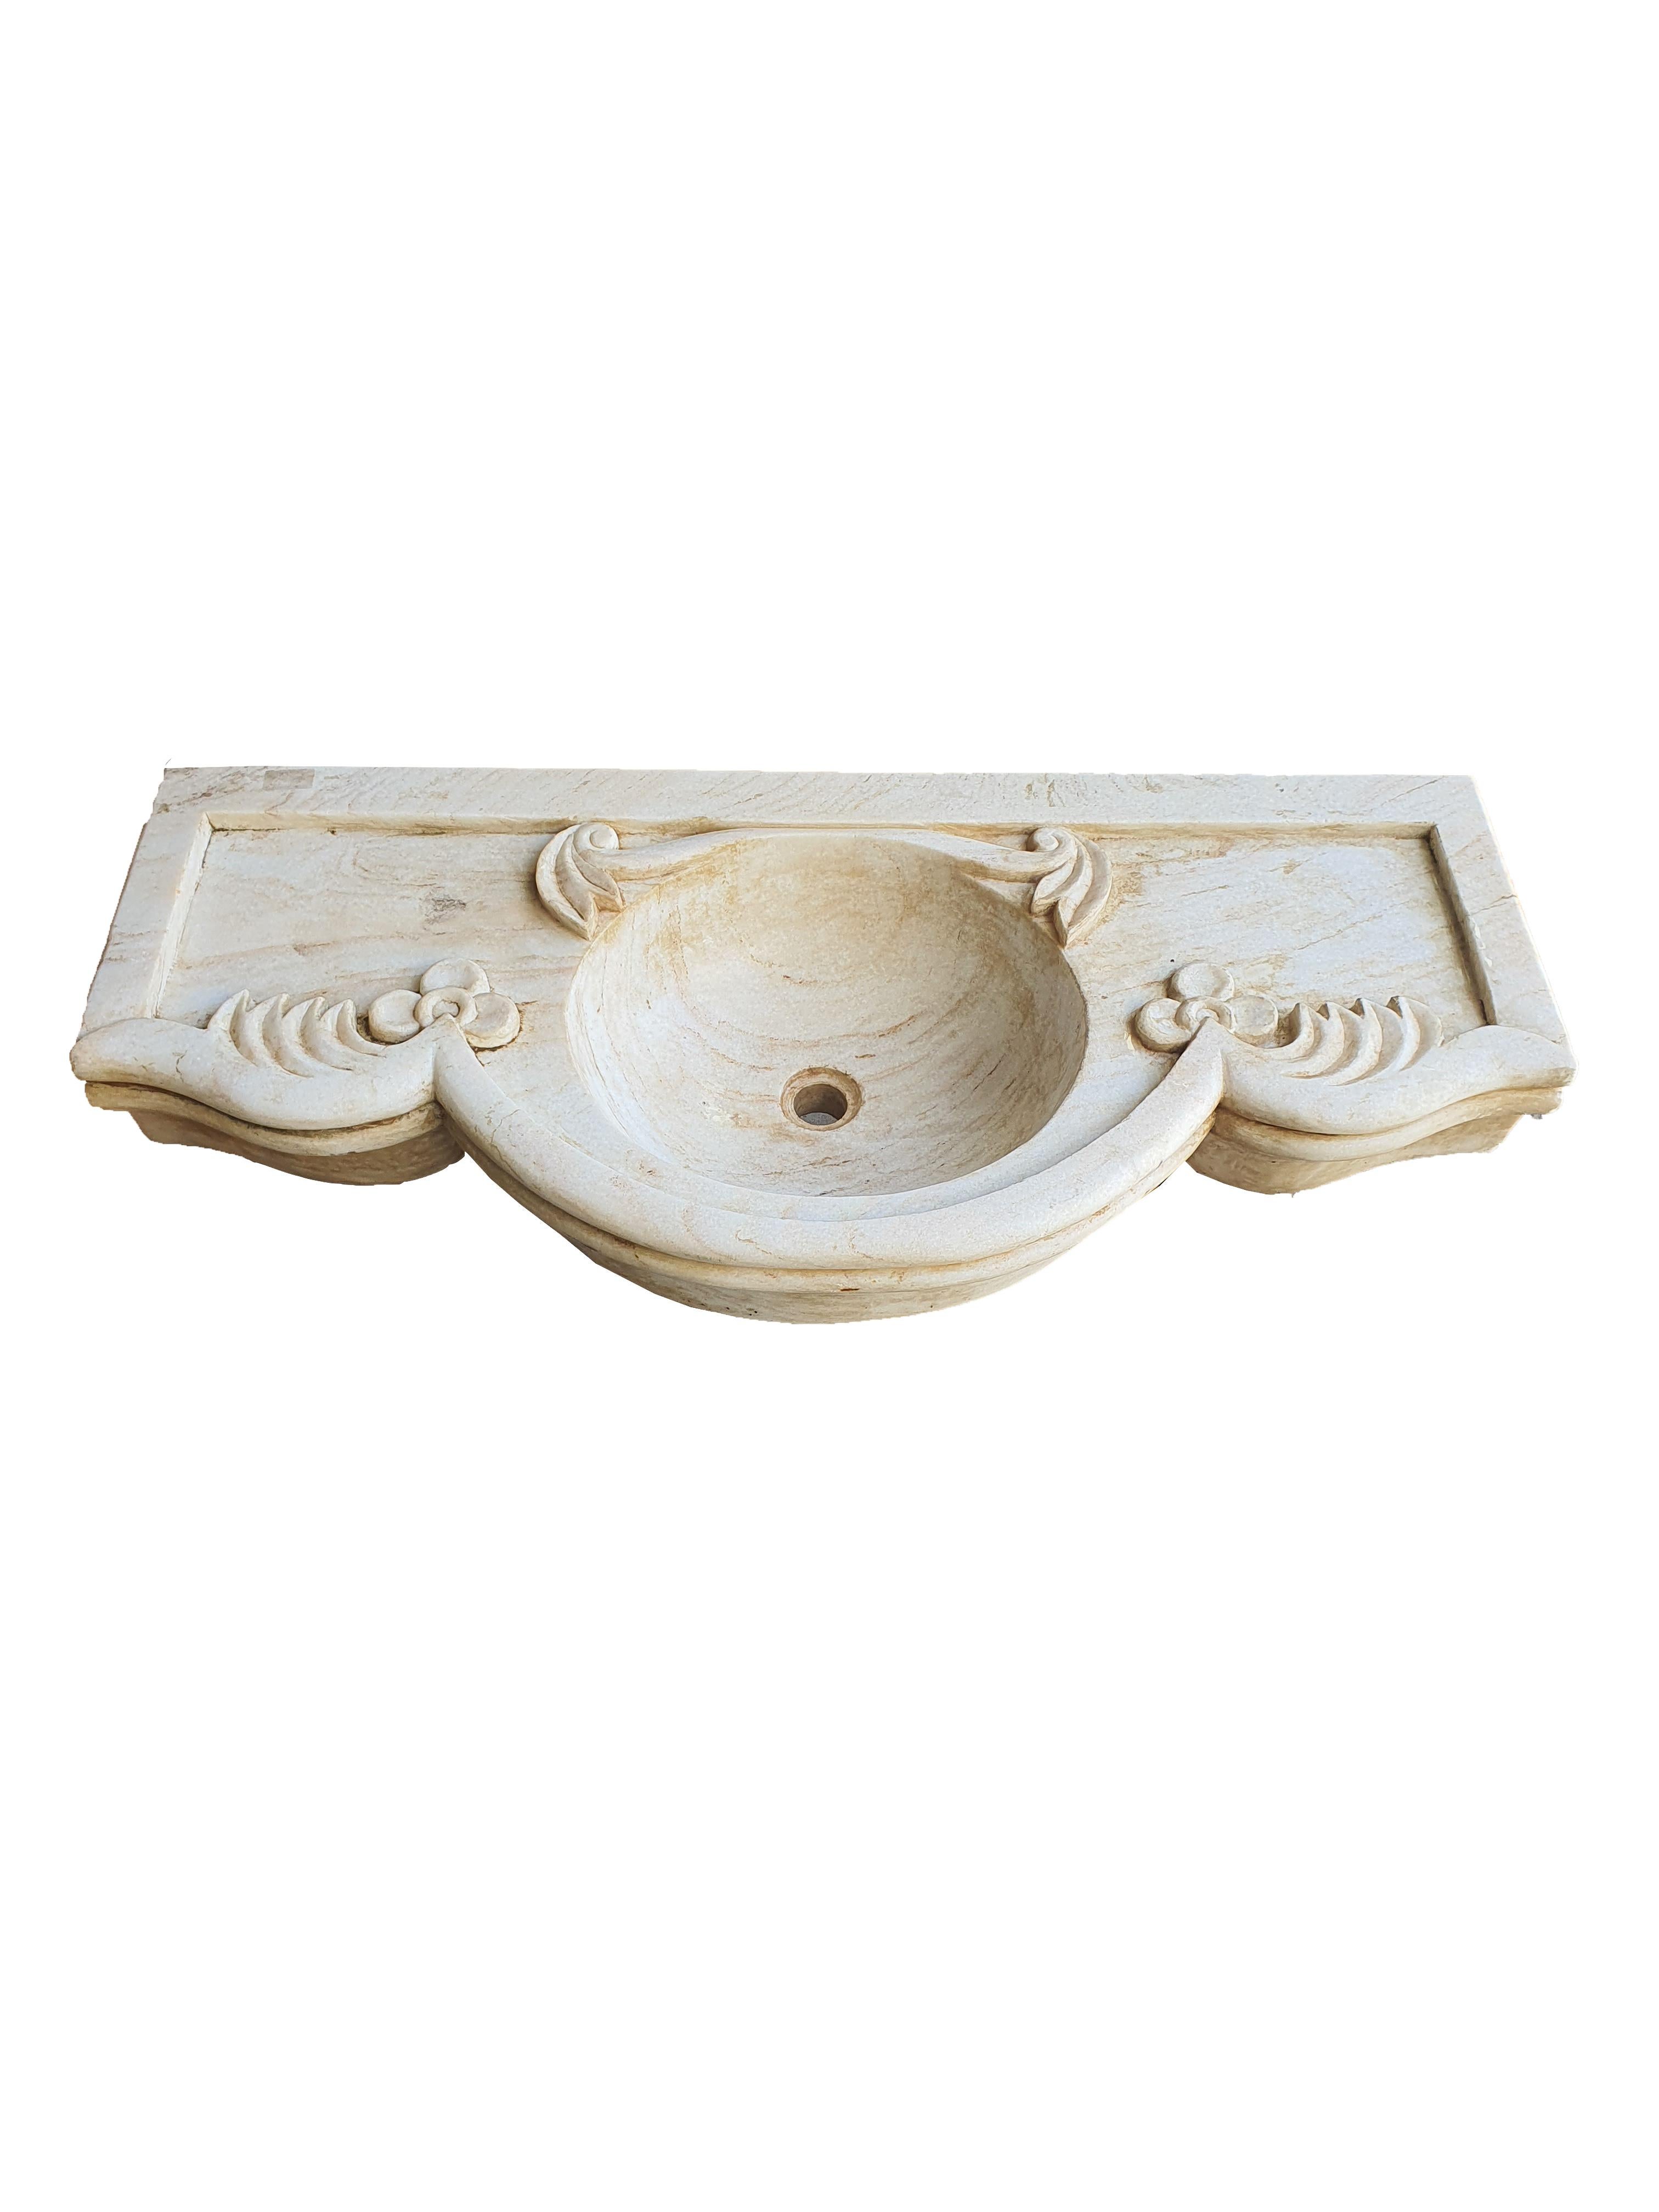 Splendid pair of classic Italian sink, made from a single block of white Carrara marble. Classic designs and movements that never go out of fashion, used since the times of the ancient Greeks and Romans.